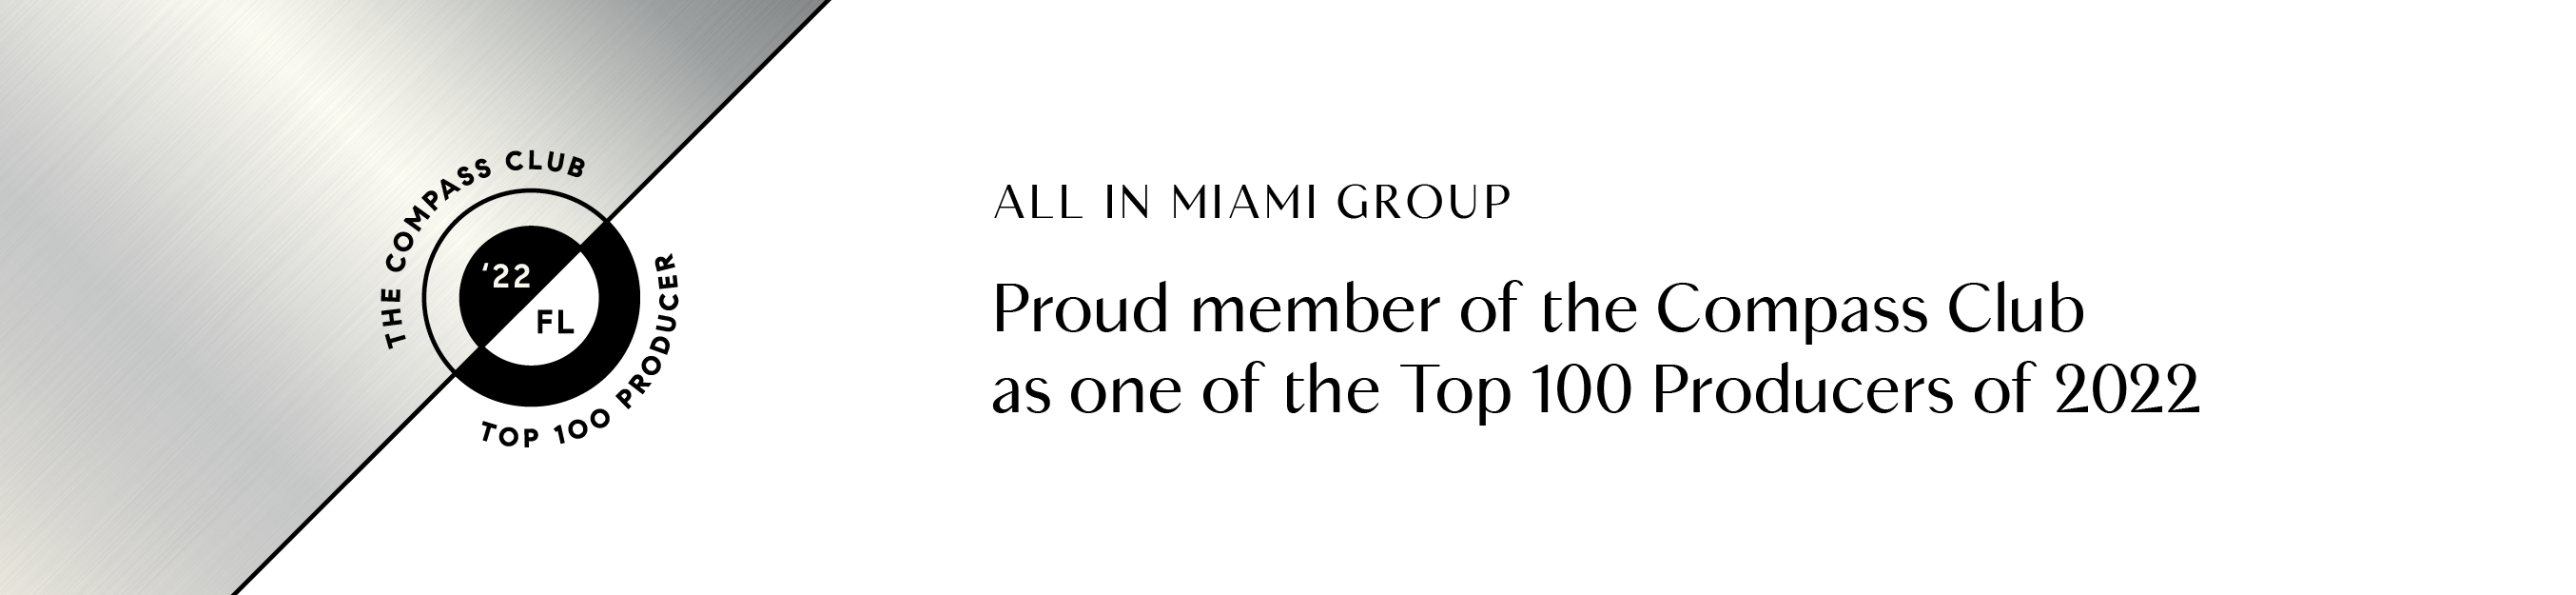 A text banner for the ALL IN MIAMI GROUP Club